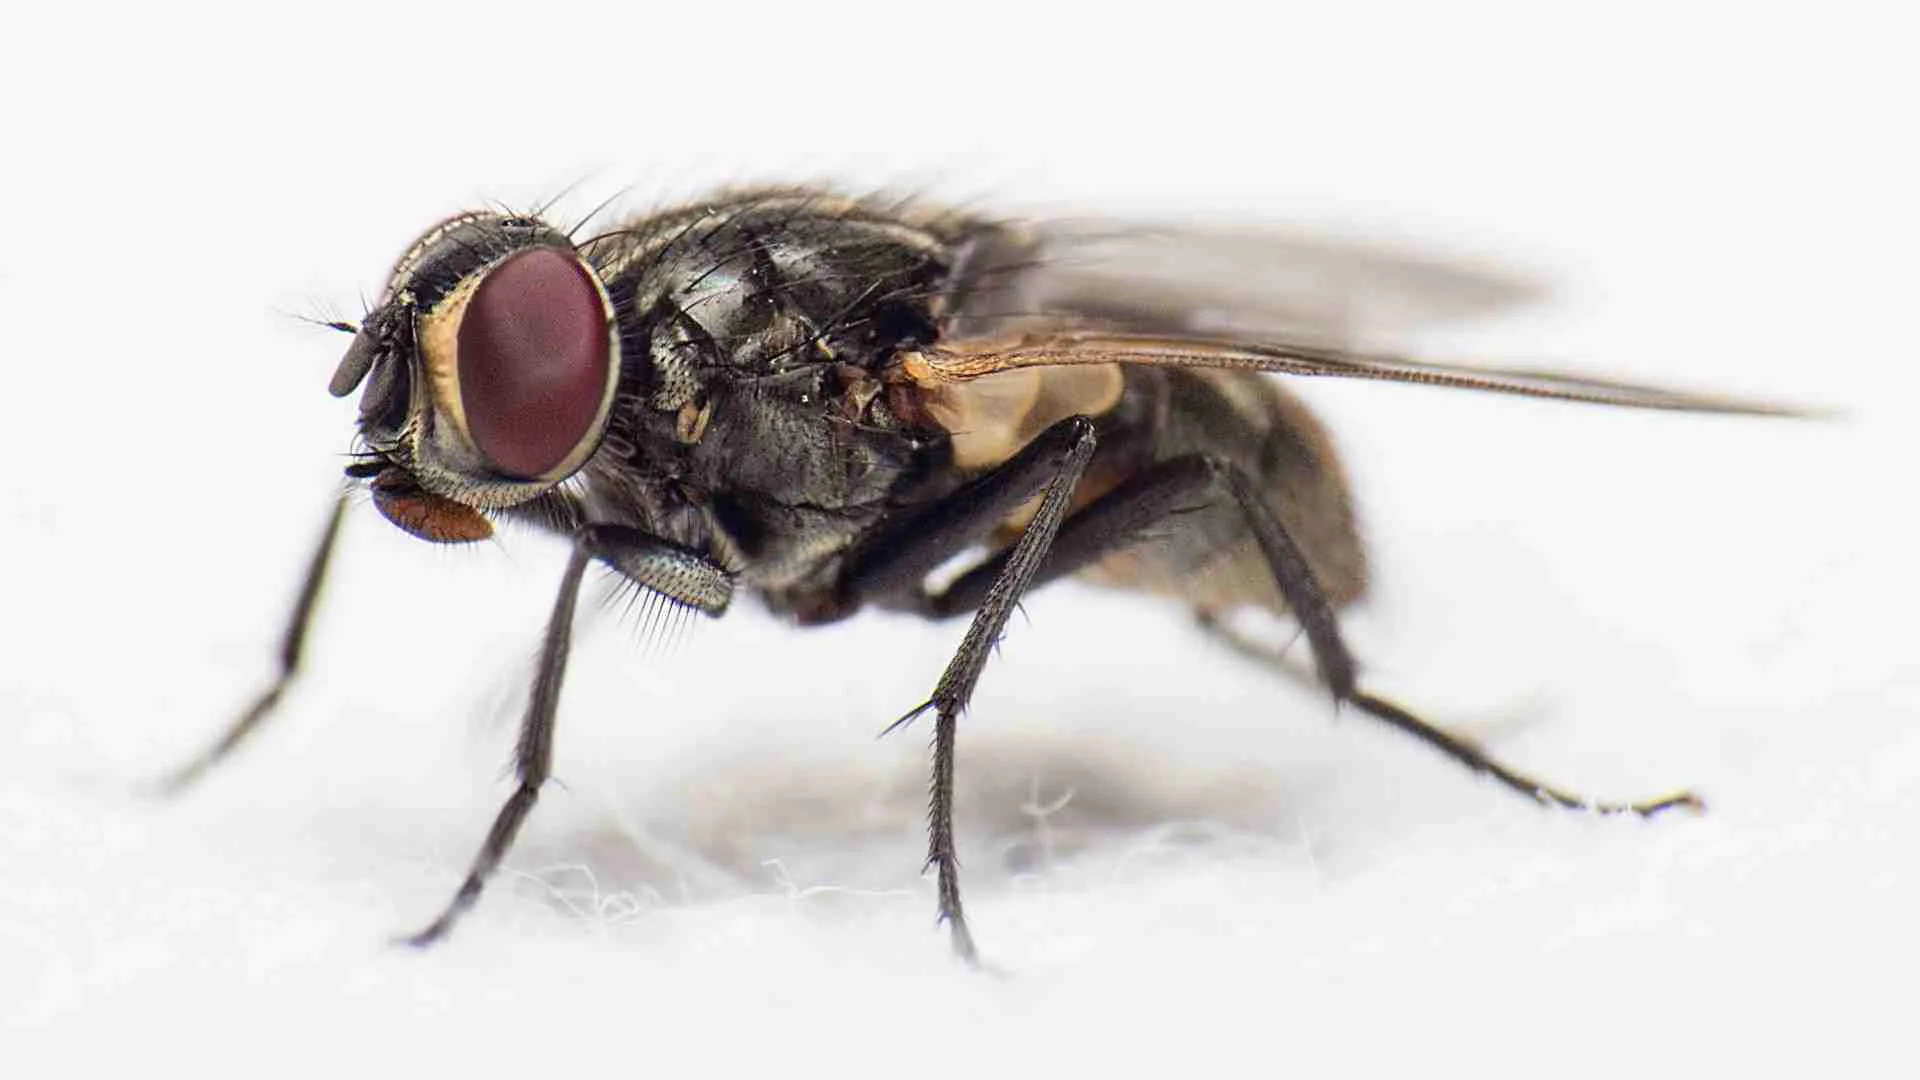 Insects as bait for Fishing: Flies